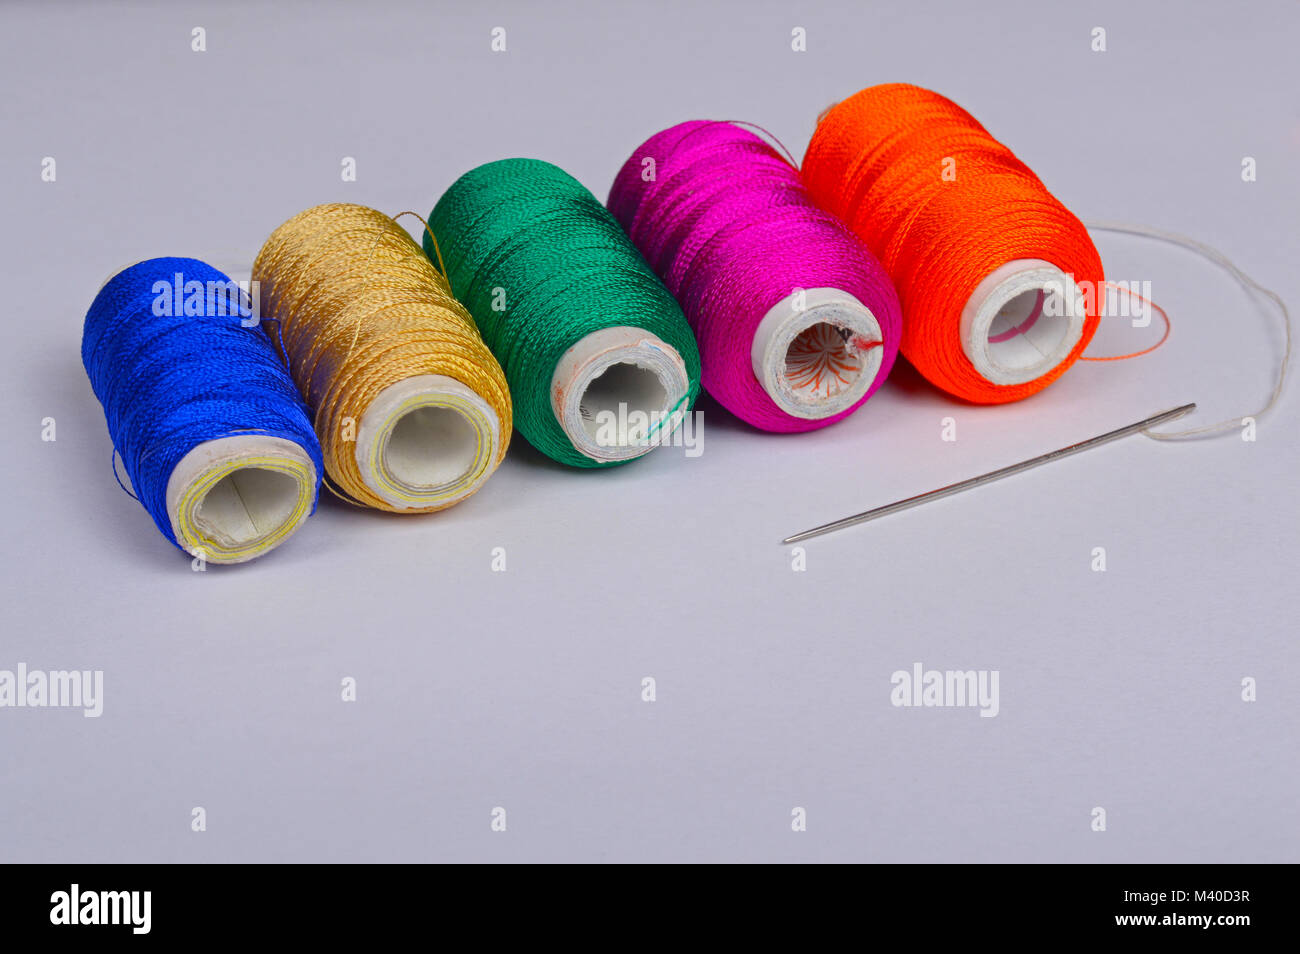 Buttons, Spool Of Thread And Zippers On White Stock Photo, Picture and  Royalty Free Image. Image 52431475.